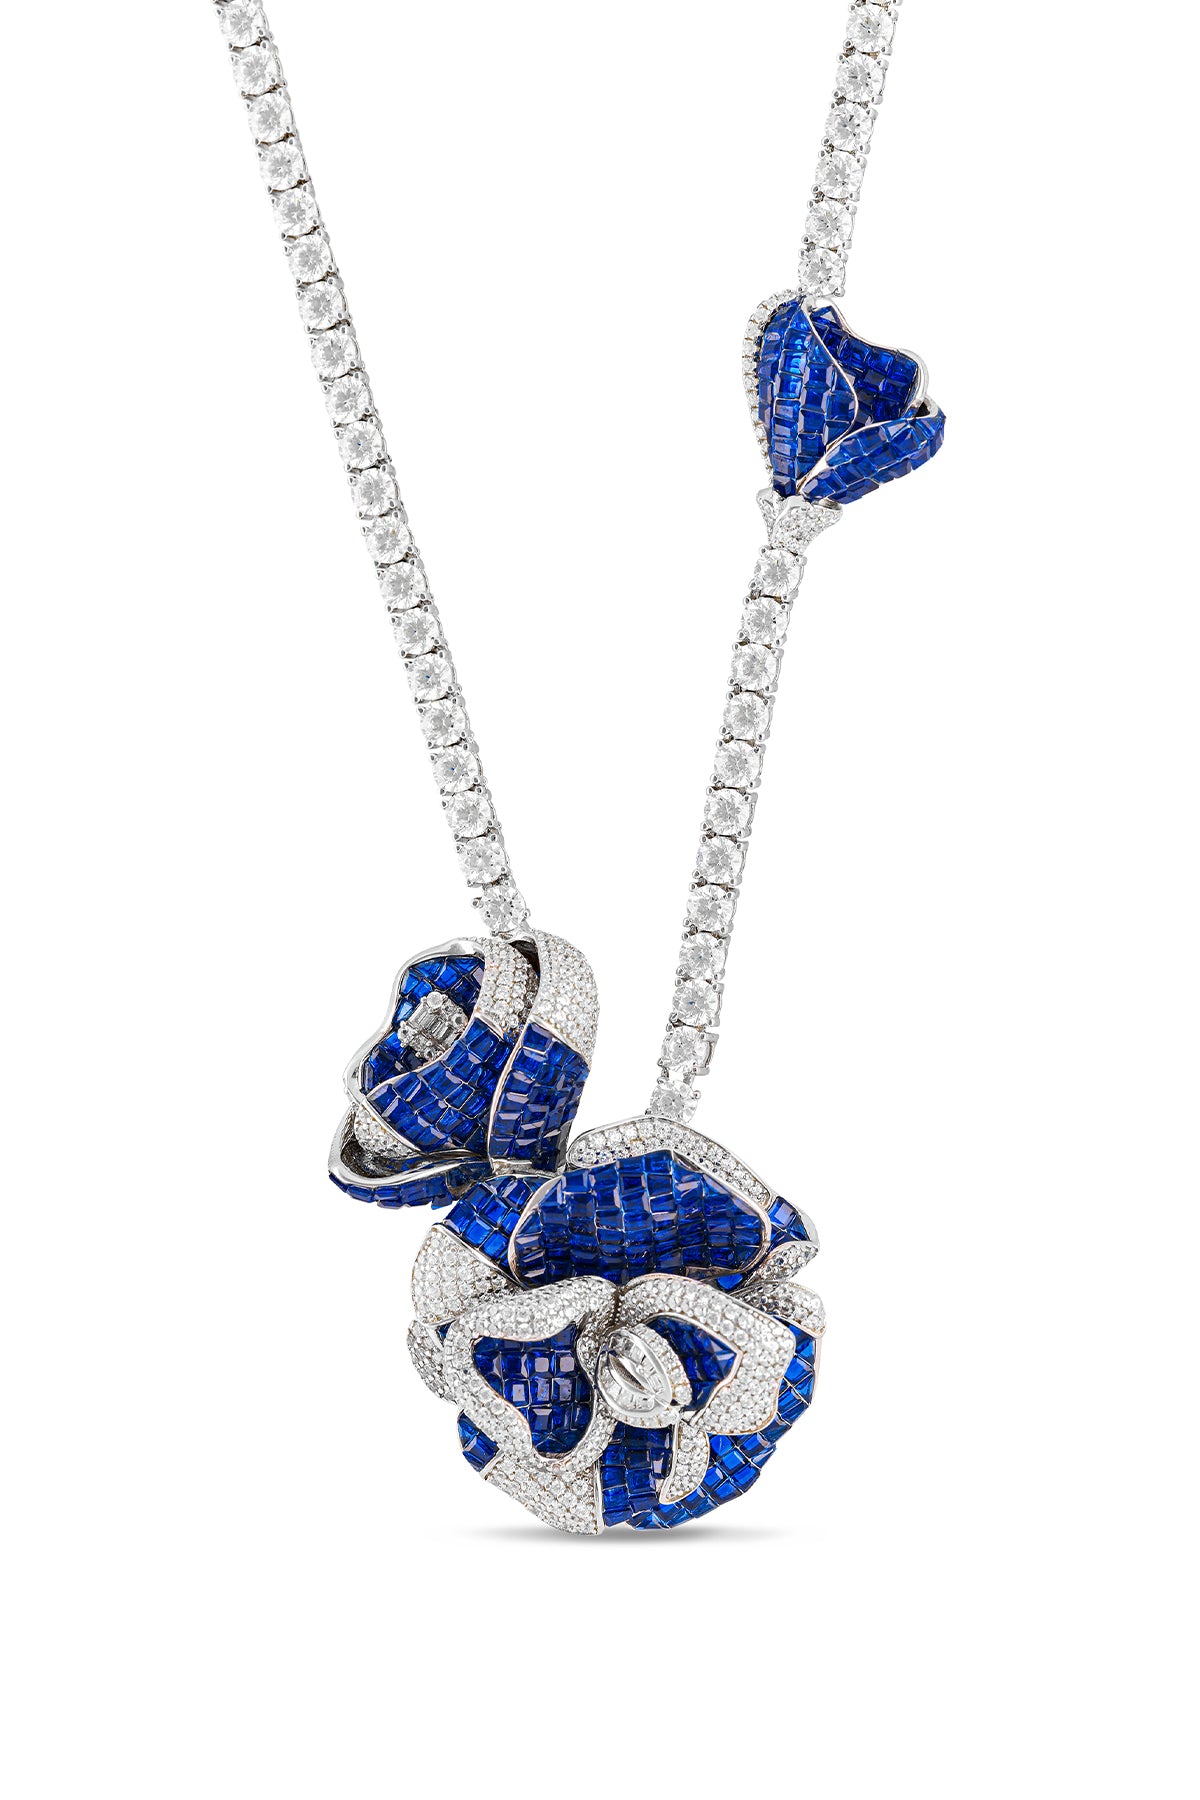 Wildflower Blue sapphire Whispers Necklace